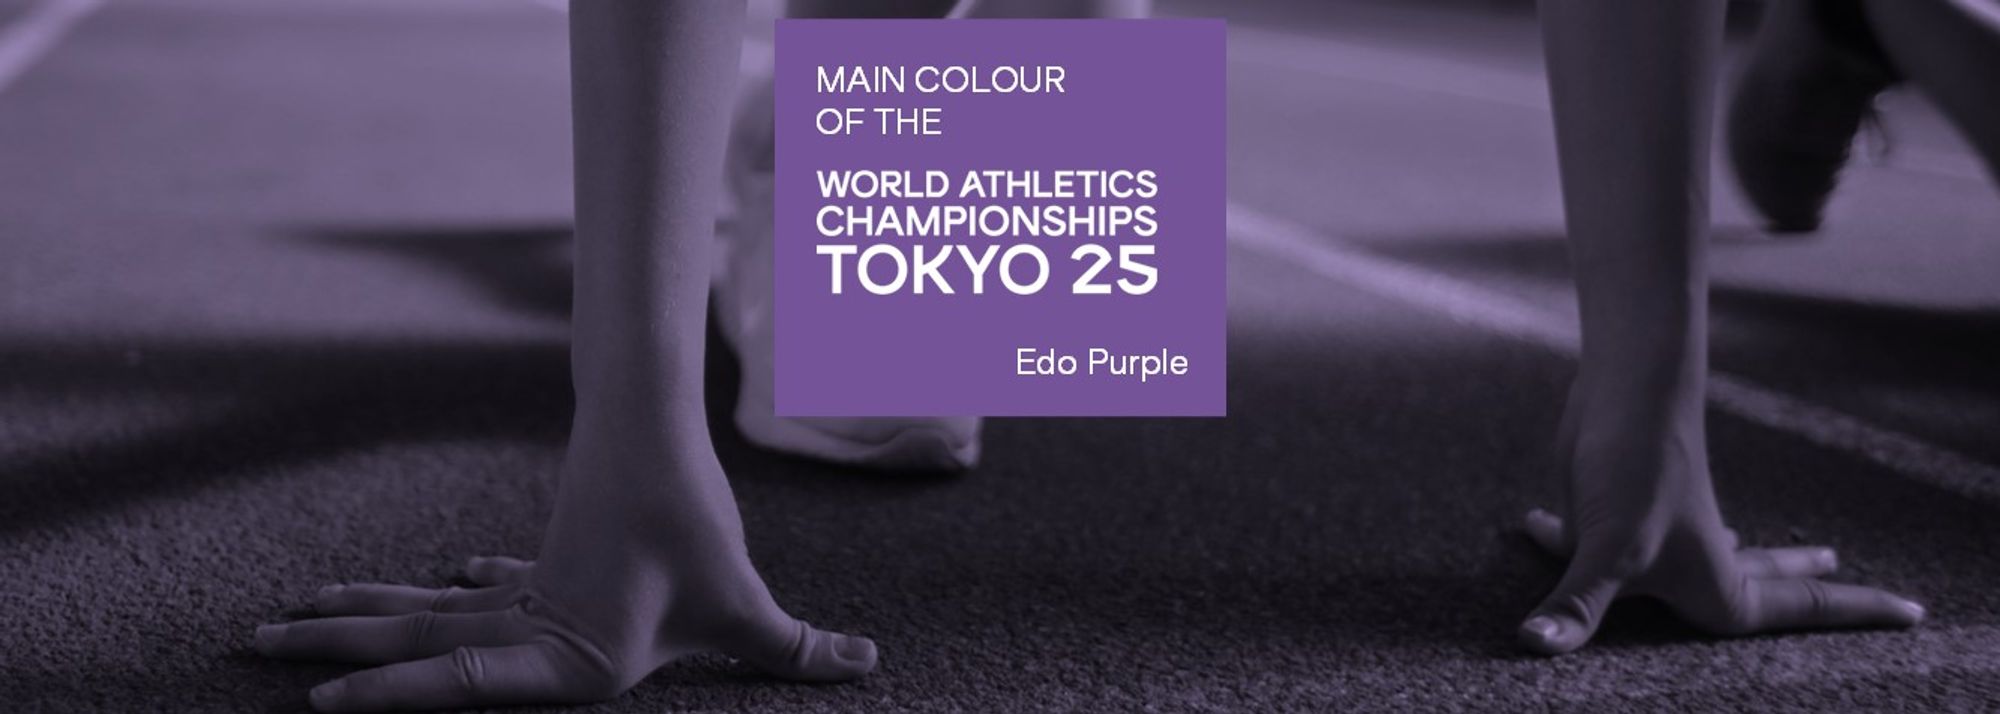 Main colour for the WCH Tokyo 25 has been selected